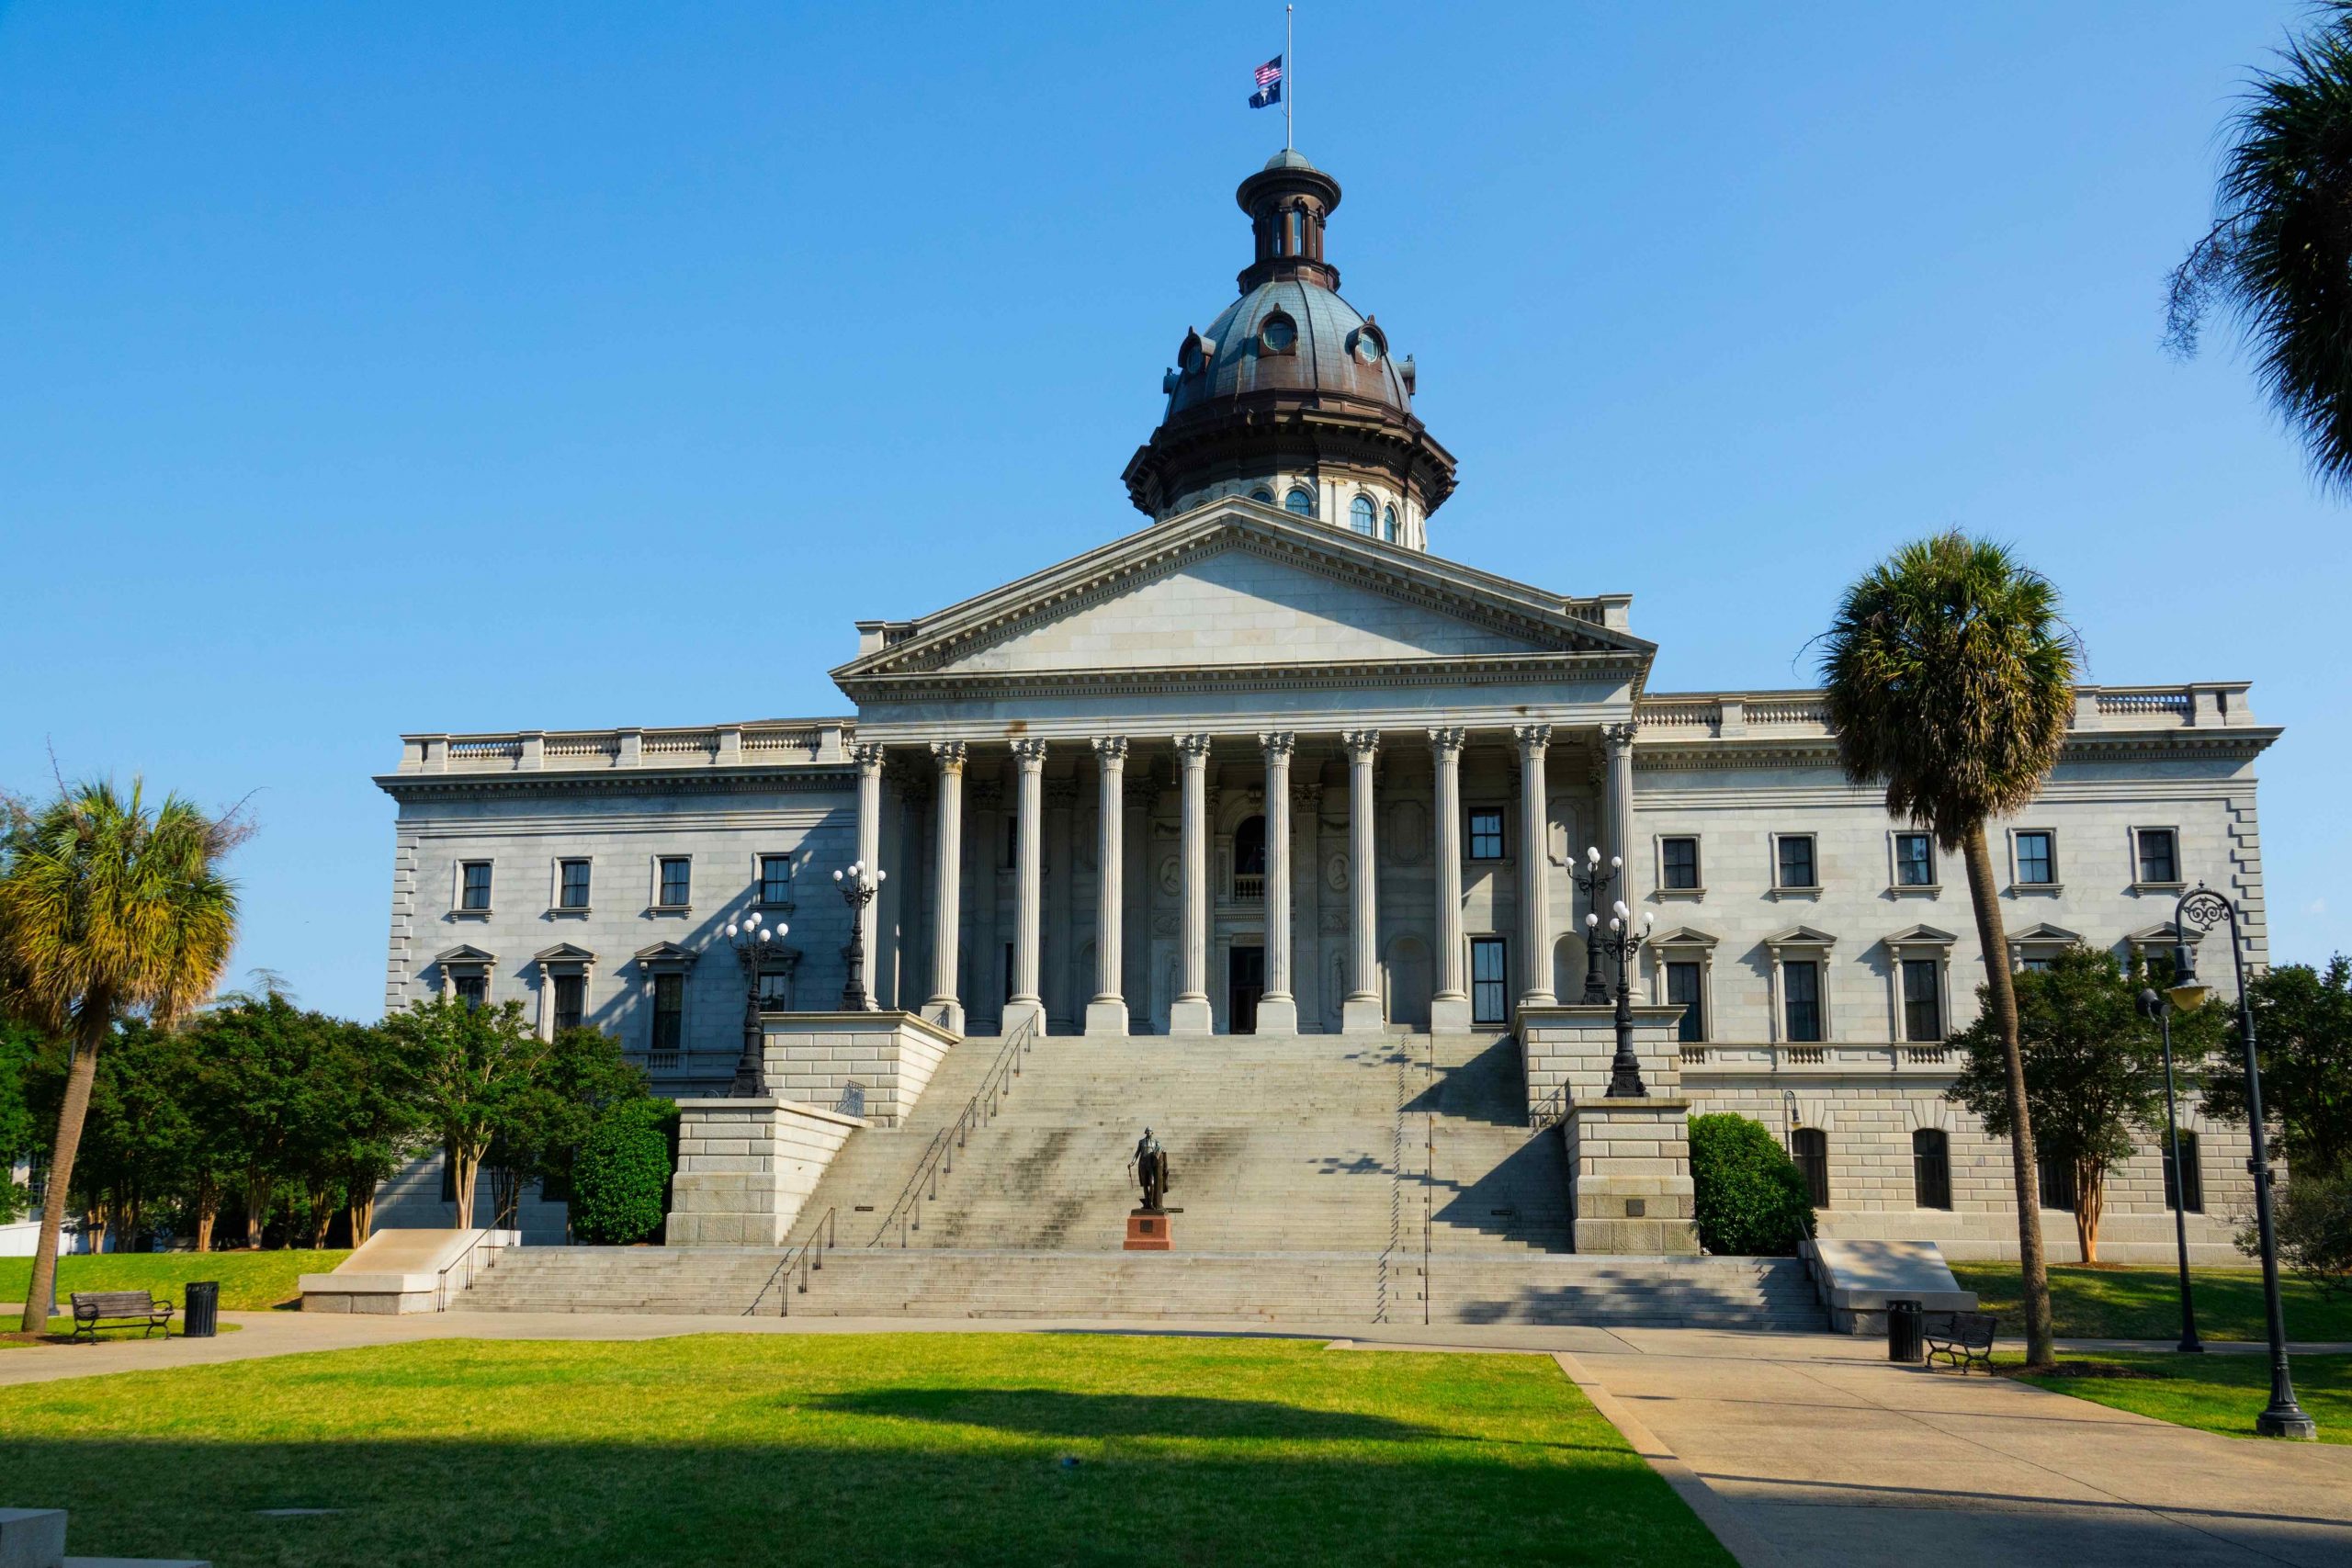 The South Carolina state house in Columbia.